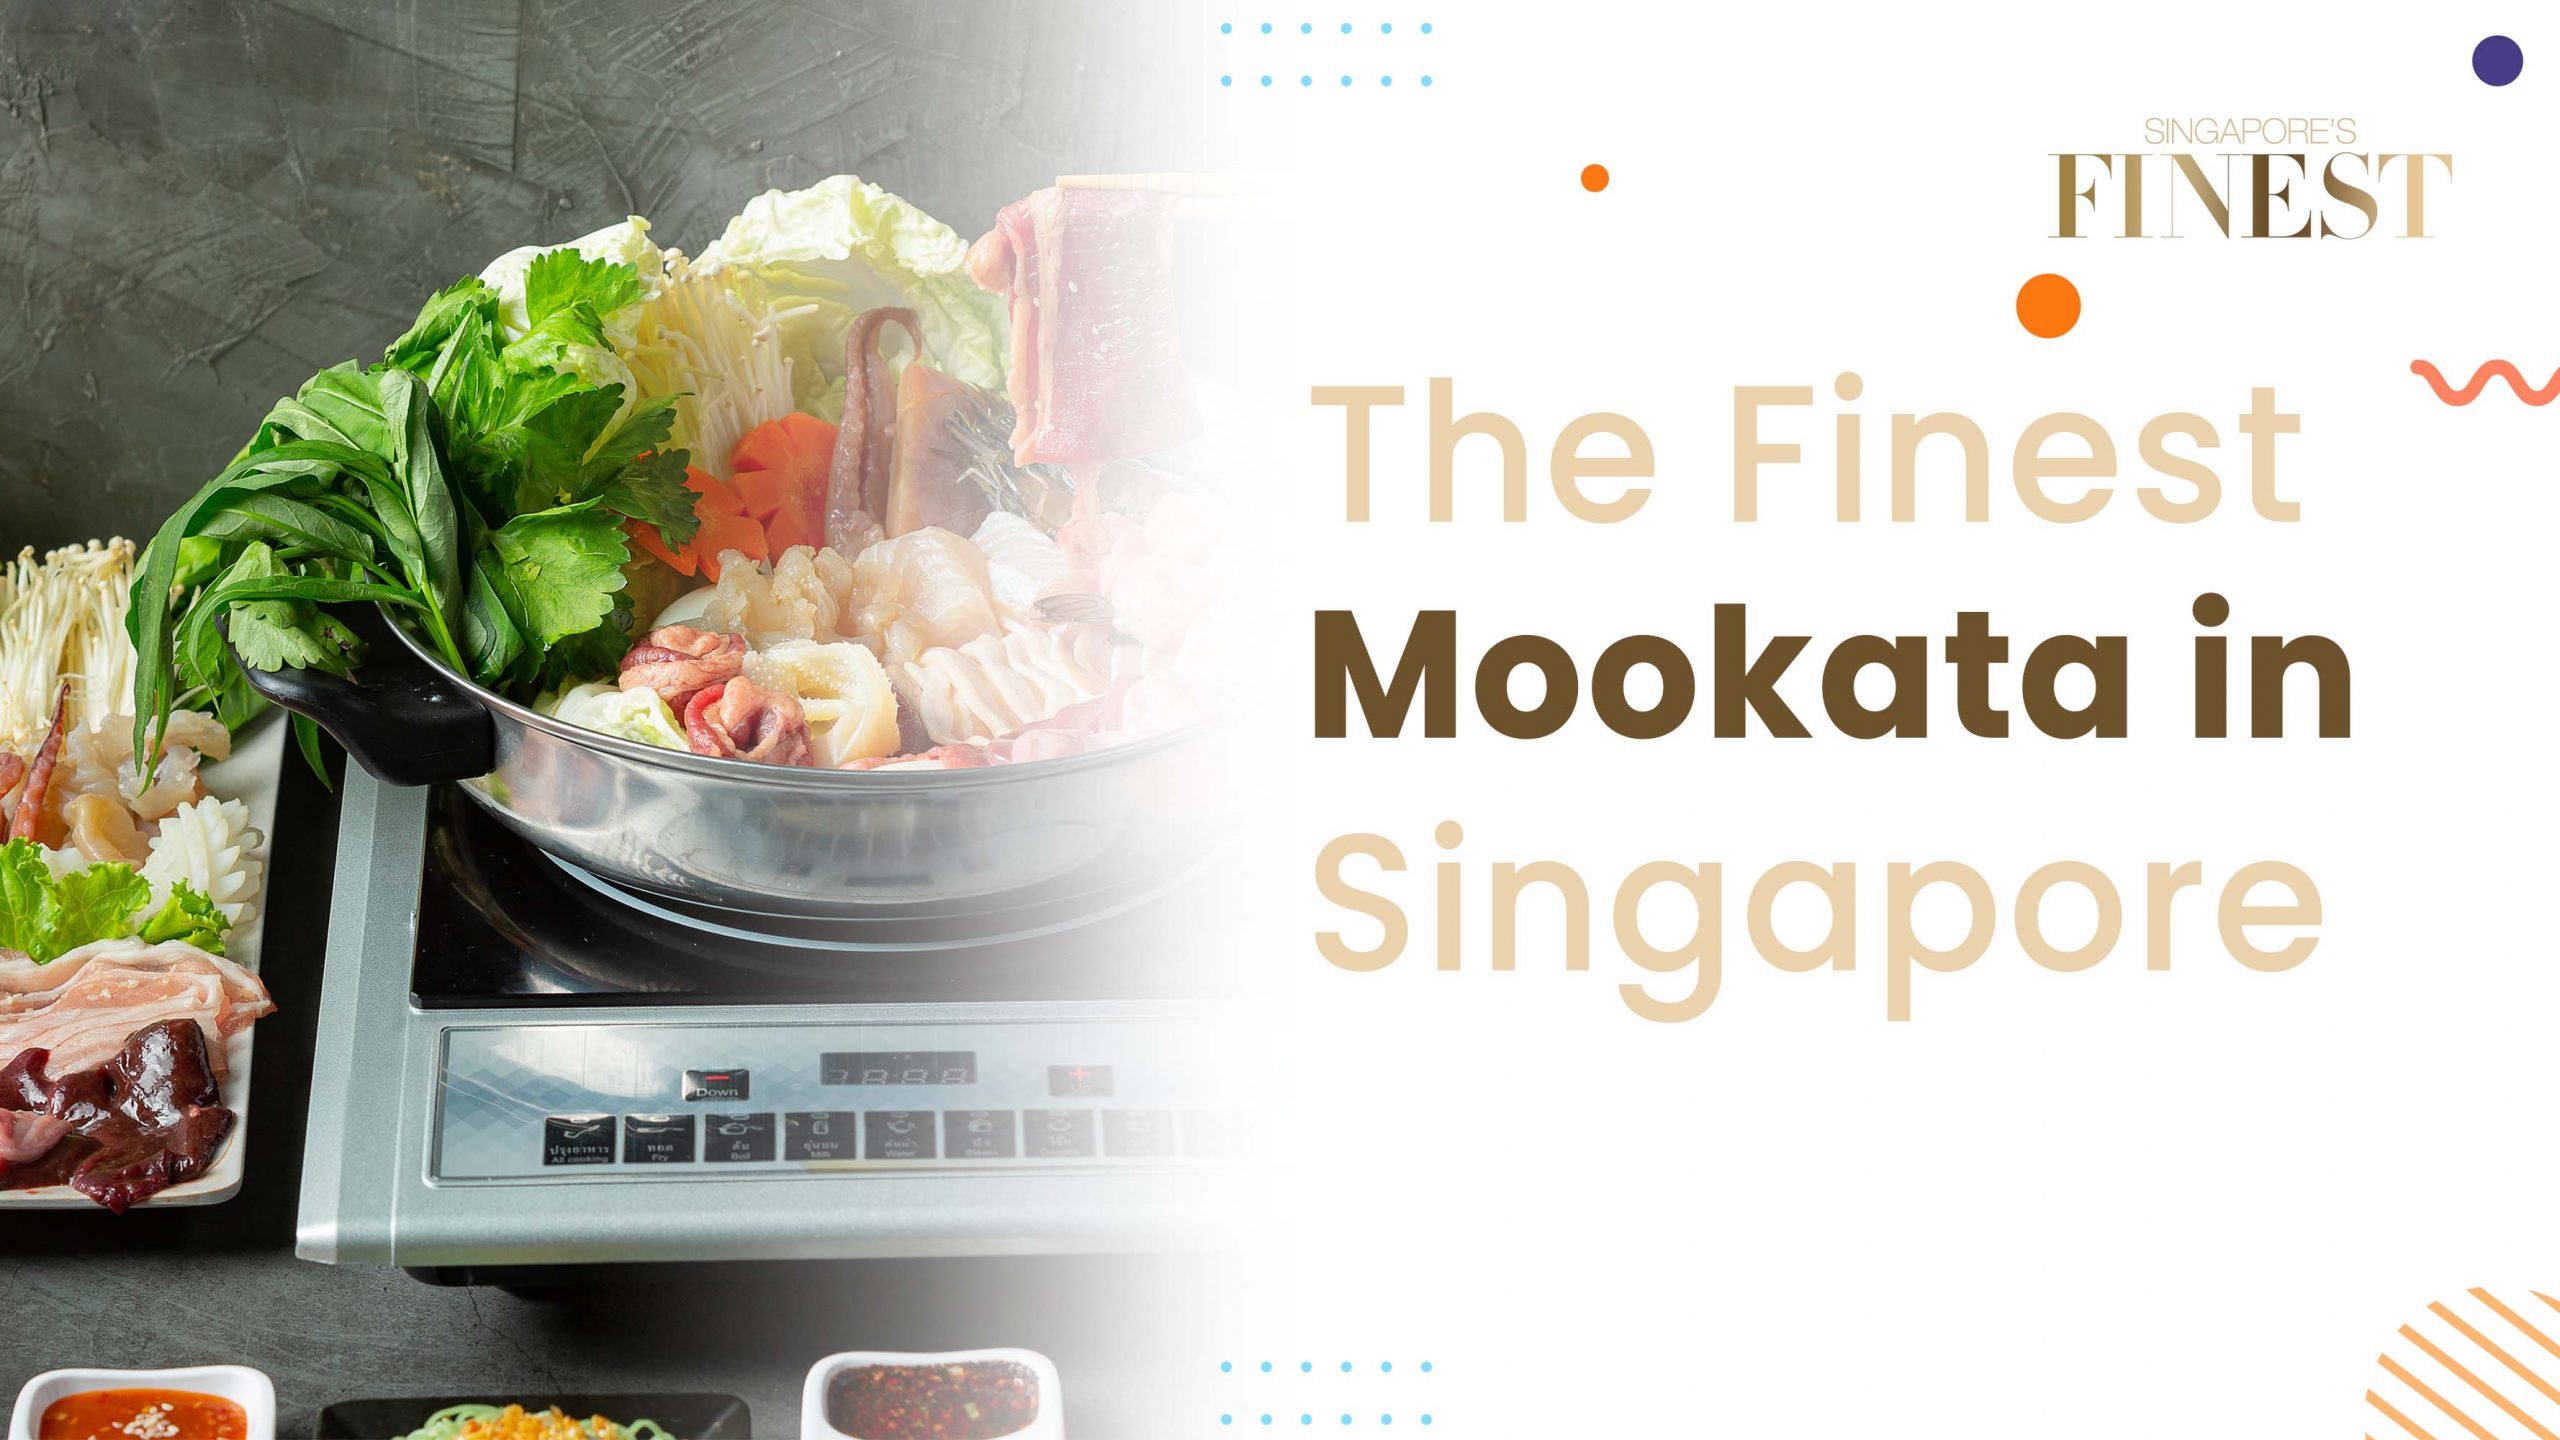 The Best Mookata in Singapore
